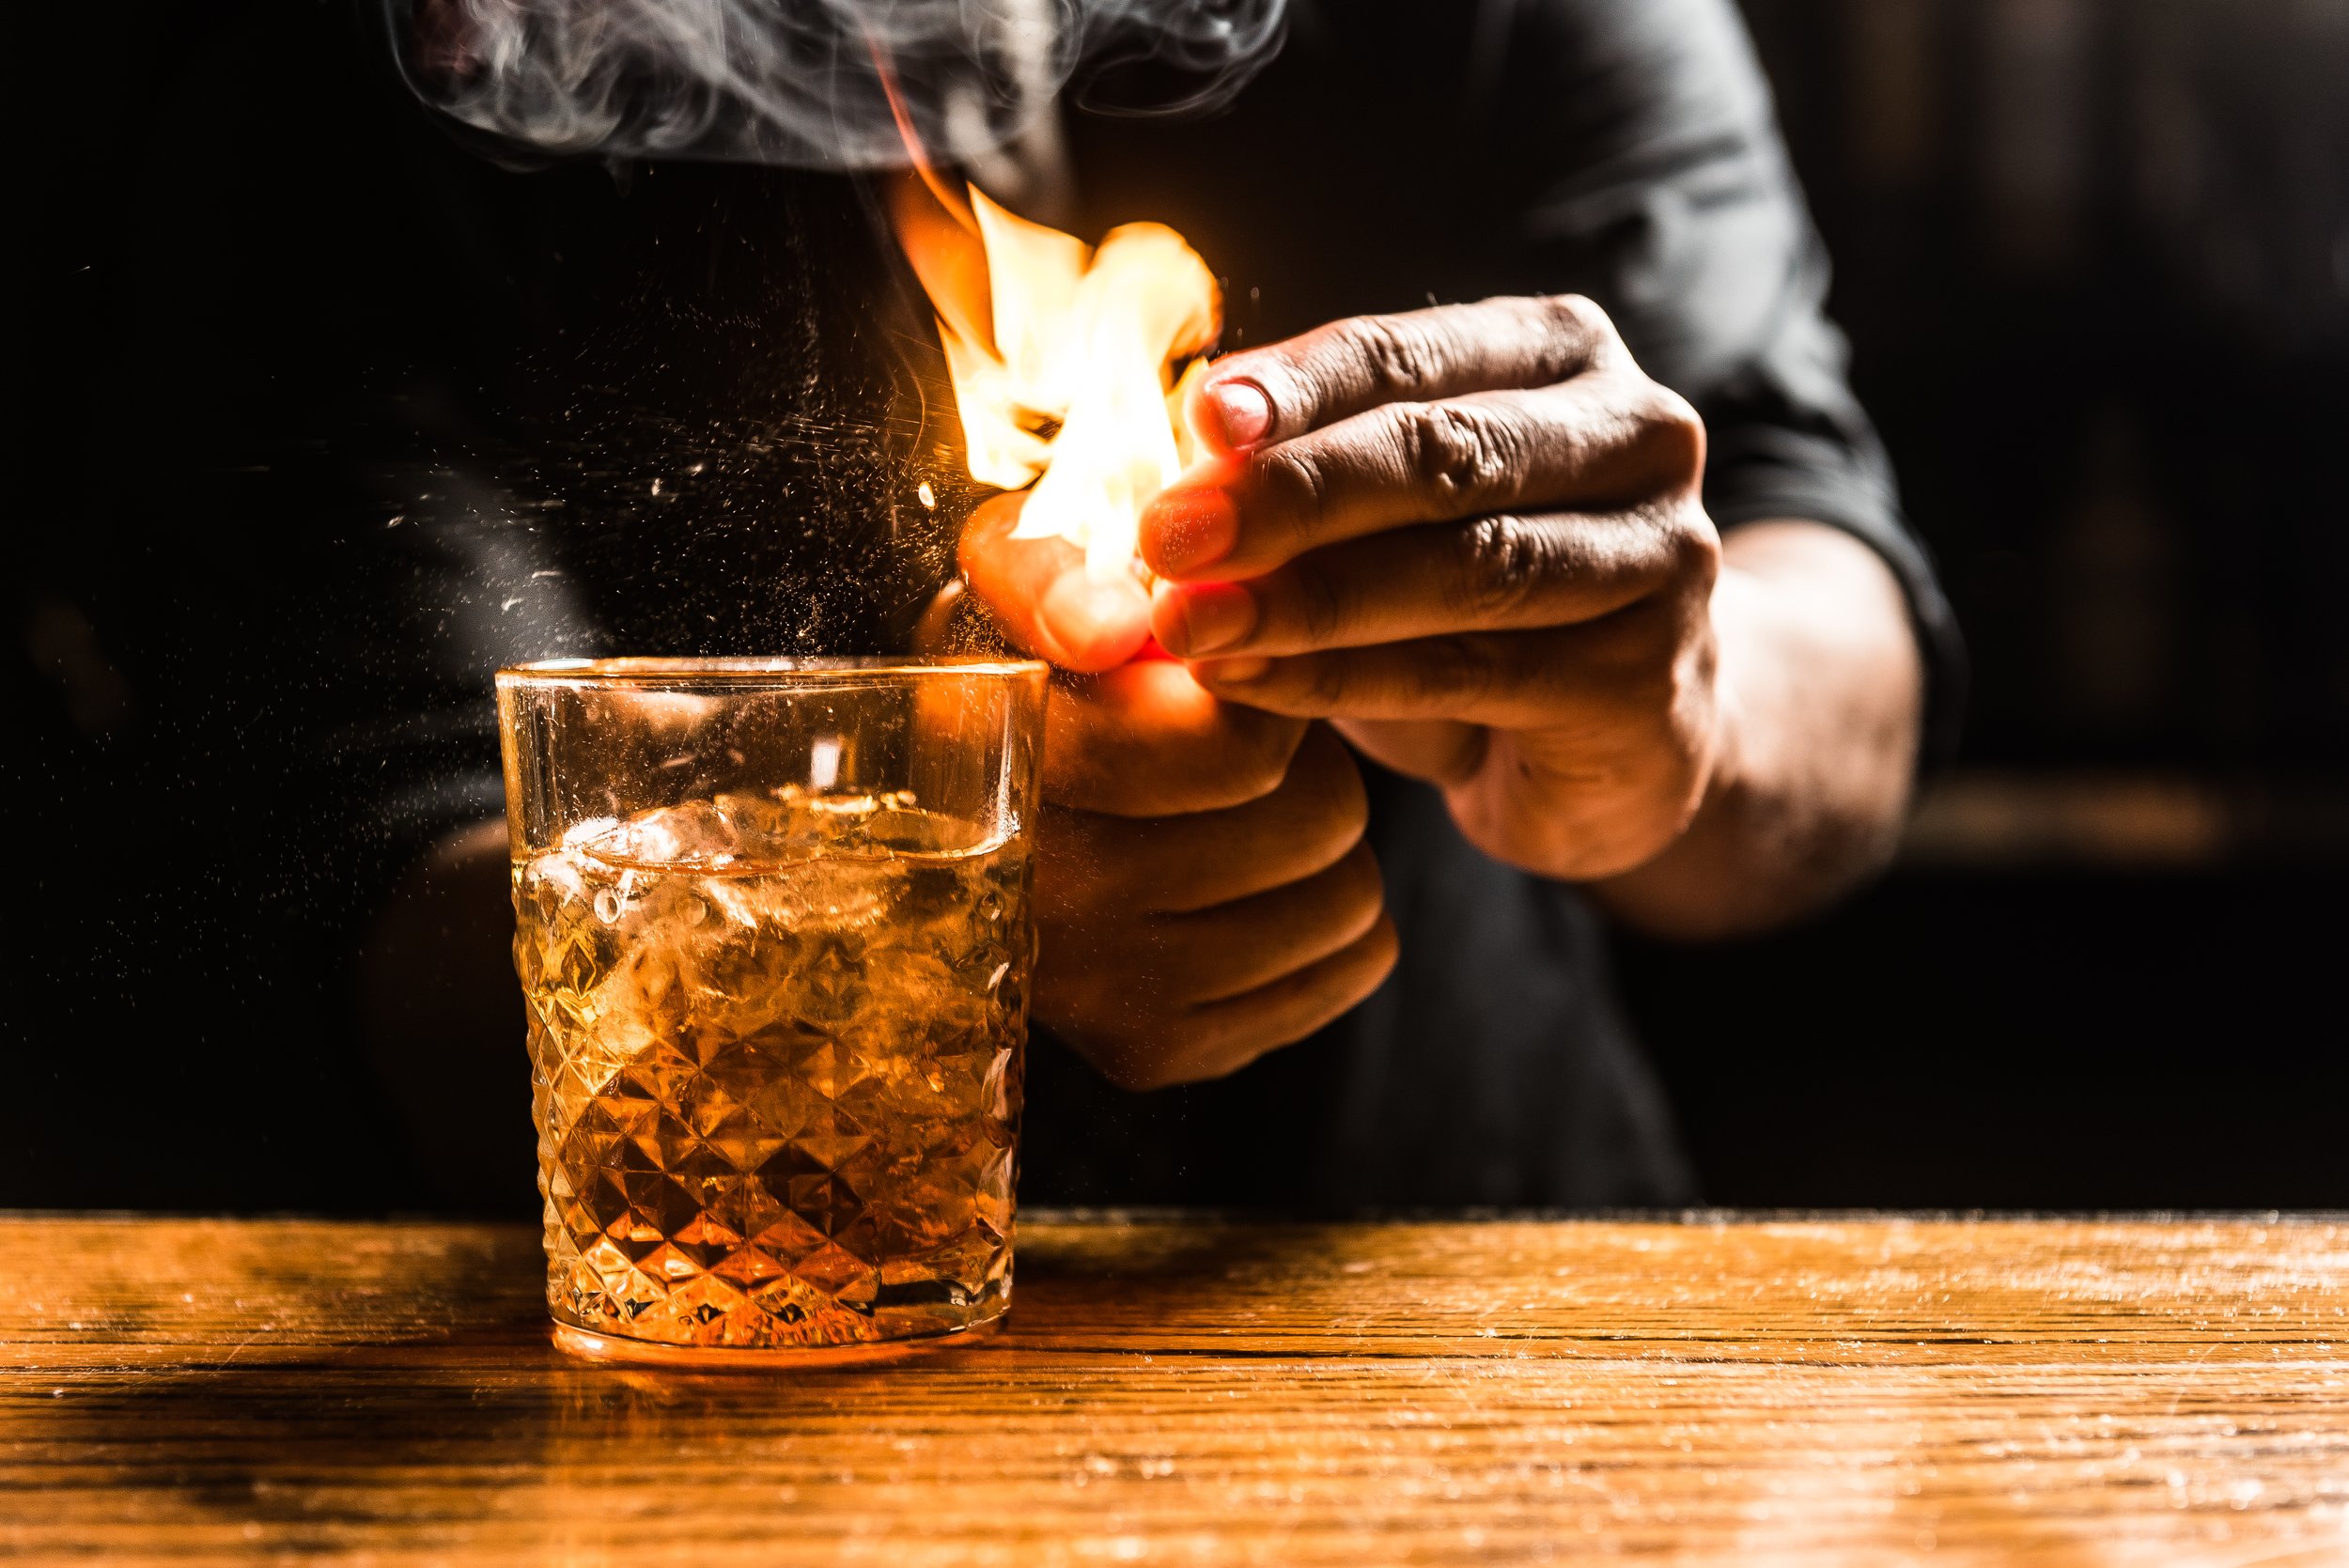 A bartender lights a match to create a flaming cocktail at Bar Charley.